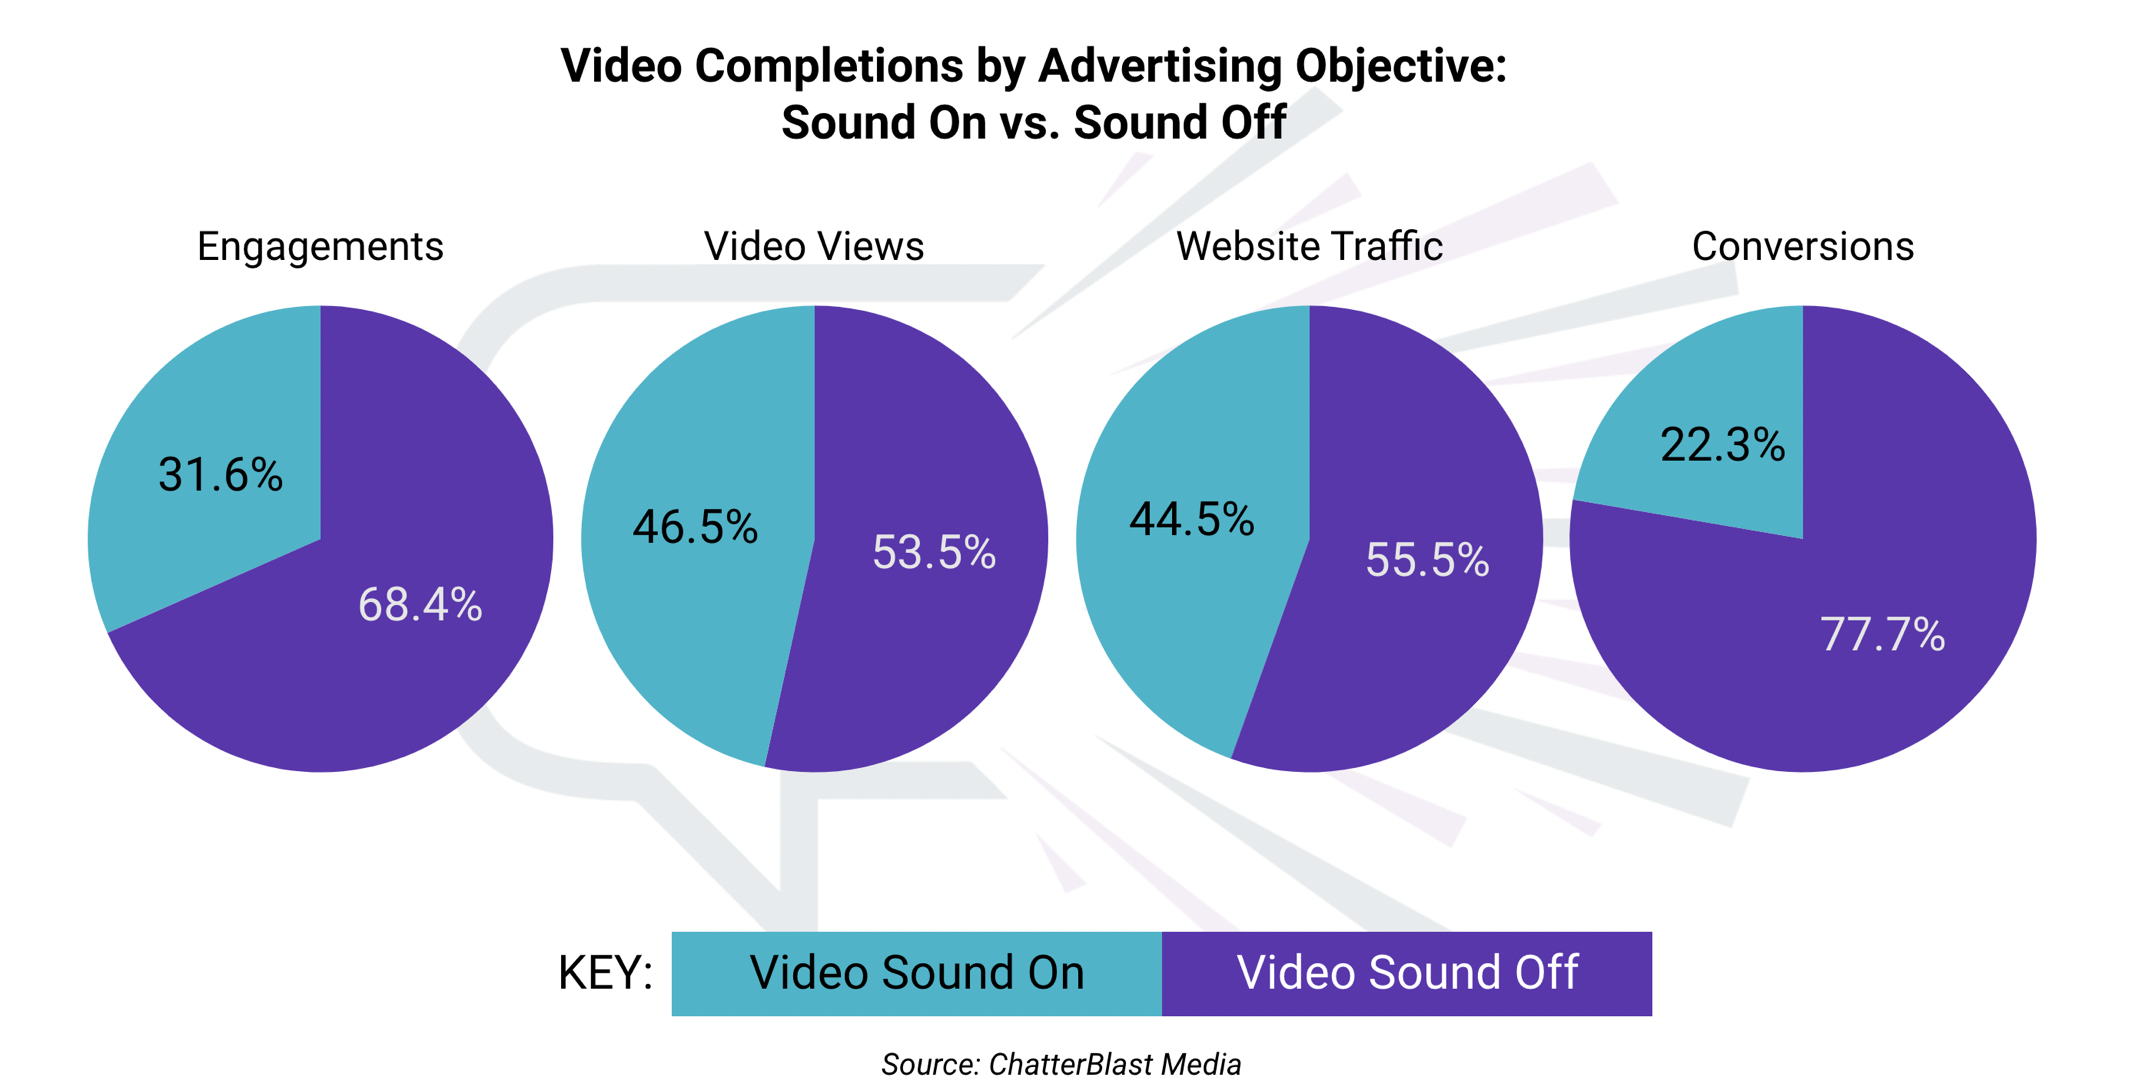 pie chart comparing video completion rate of sound on vs. sound off videos for different ad objectives